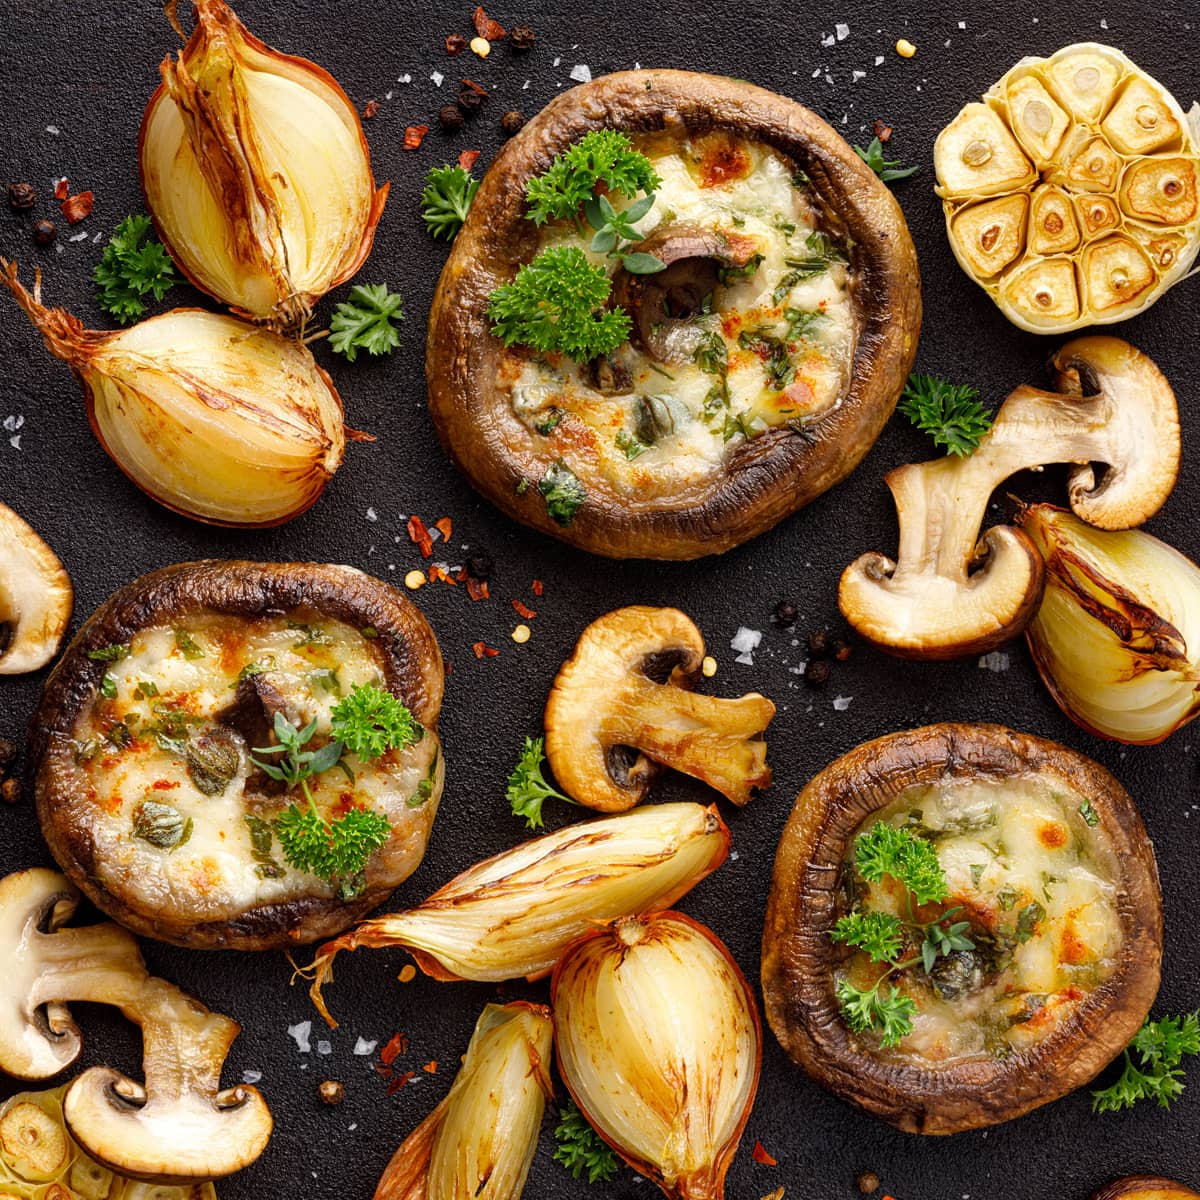 Top view of stuffed mushrooms near some roasted onions and aromatic herbs.